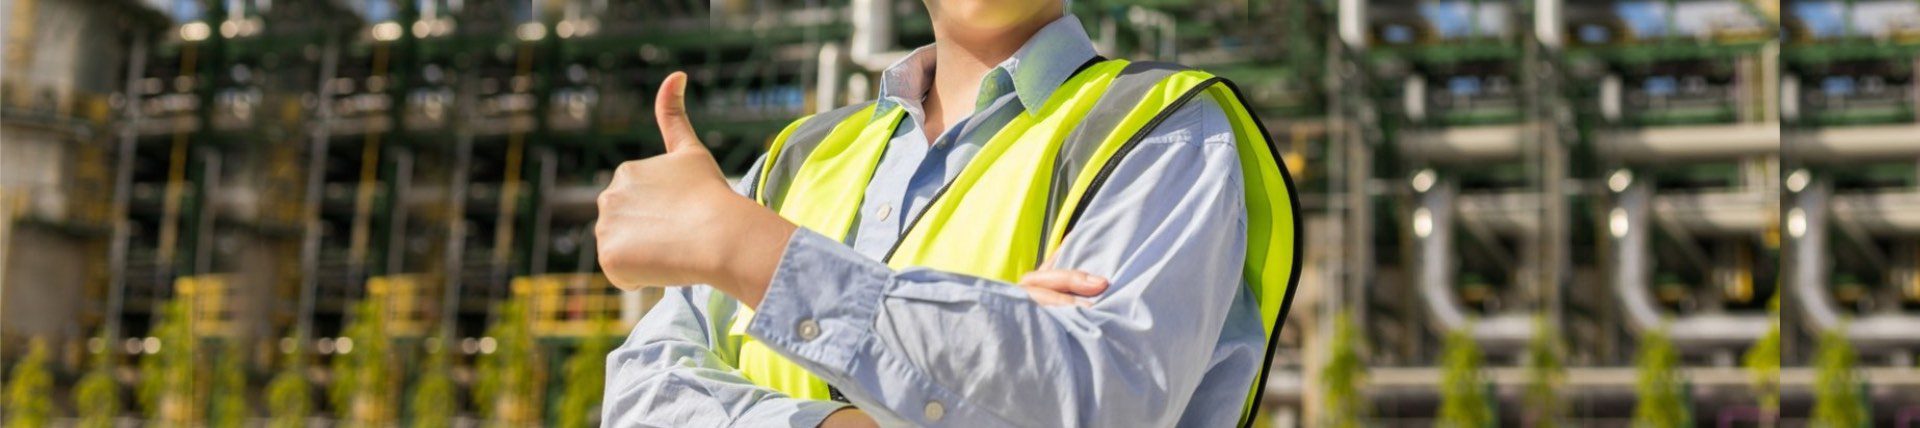 Field Safety Inspectors for Job Site Safety